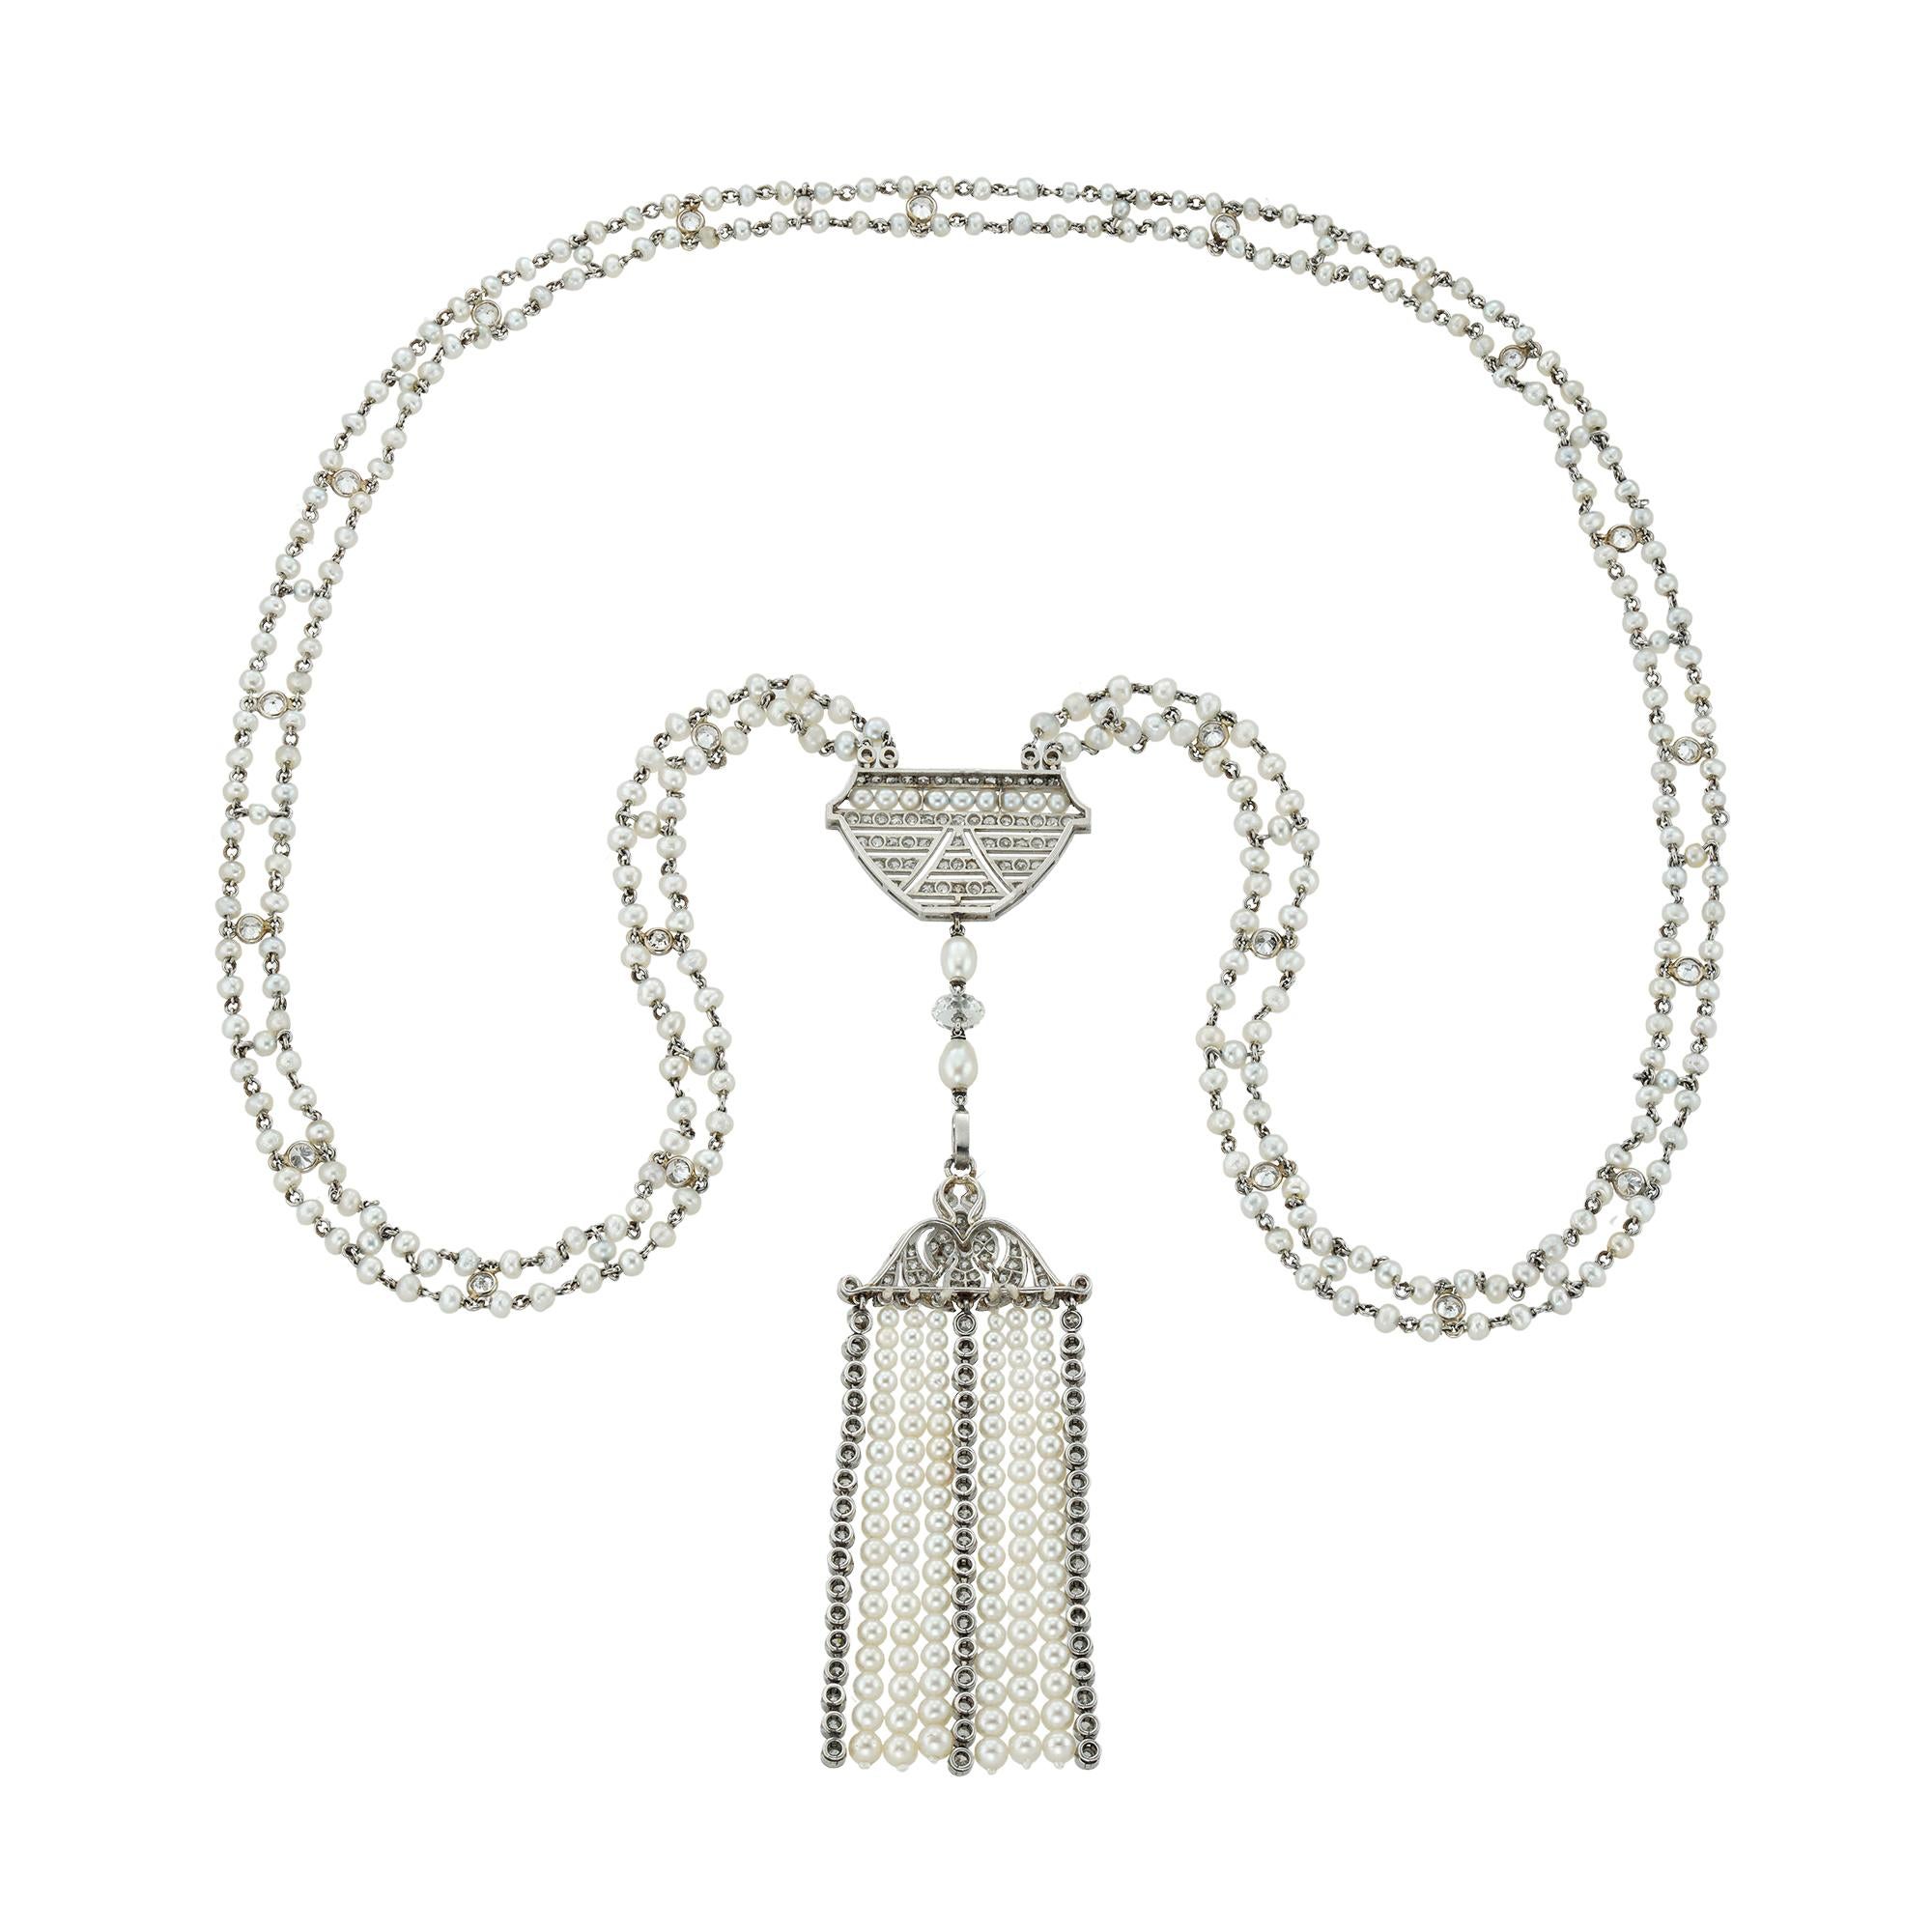 A Belle Epoque natural pearl and diamond sautoir necklace, centred with an openwork plaque of geometric design, encrusted with swiss-cut diamonds and pearls, suspending two pear-shaped pearls and a diamond bead terminating to a tassel, the